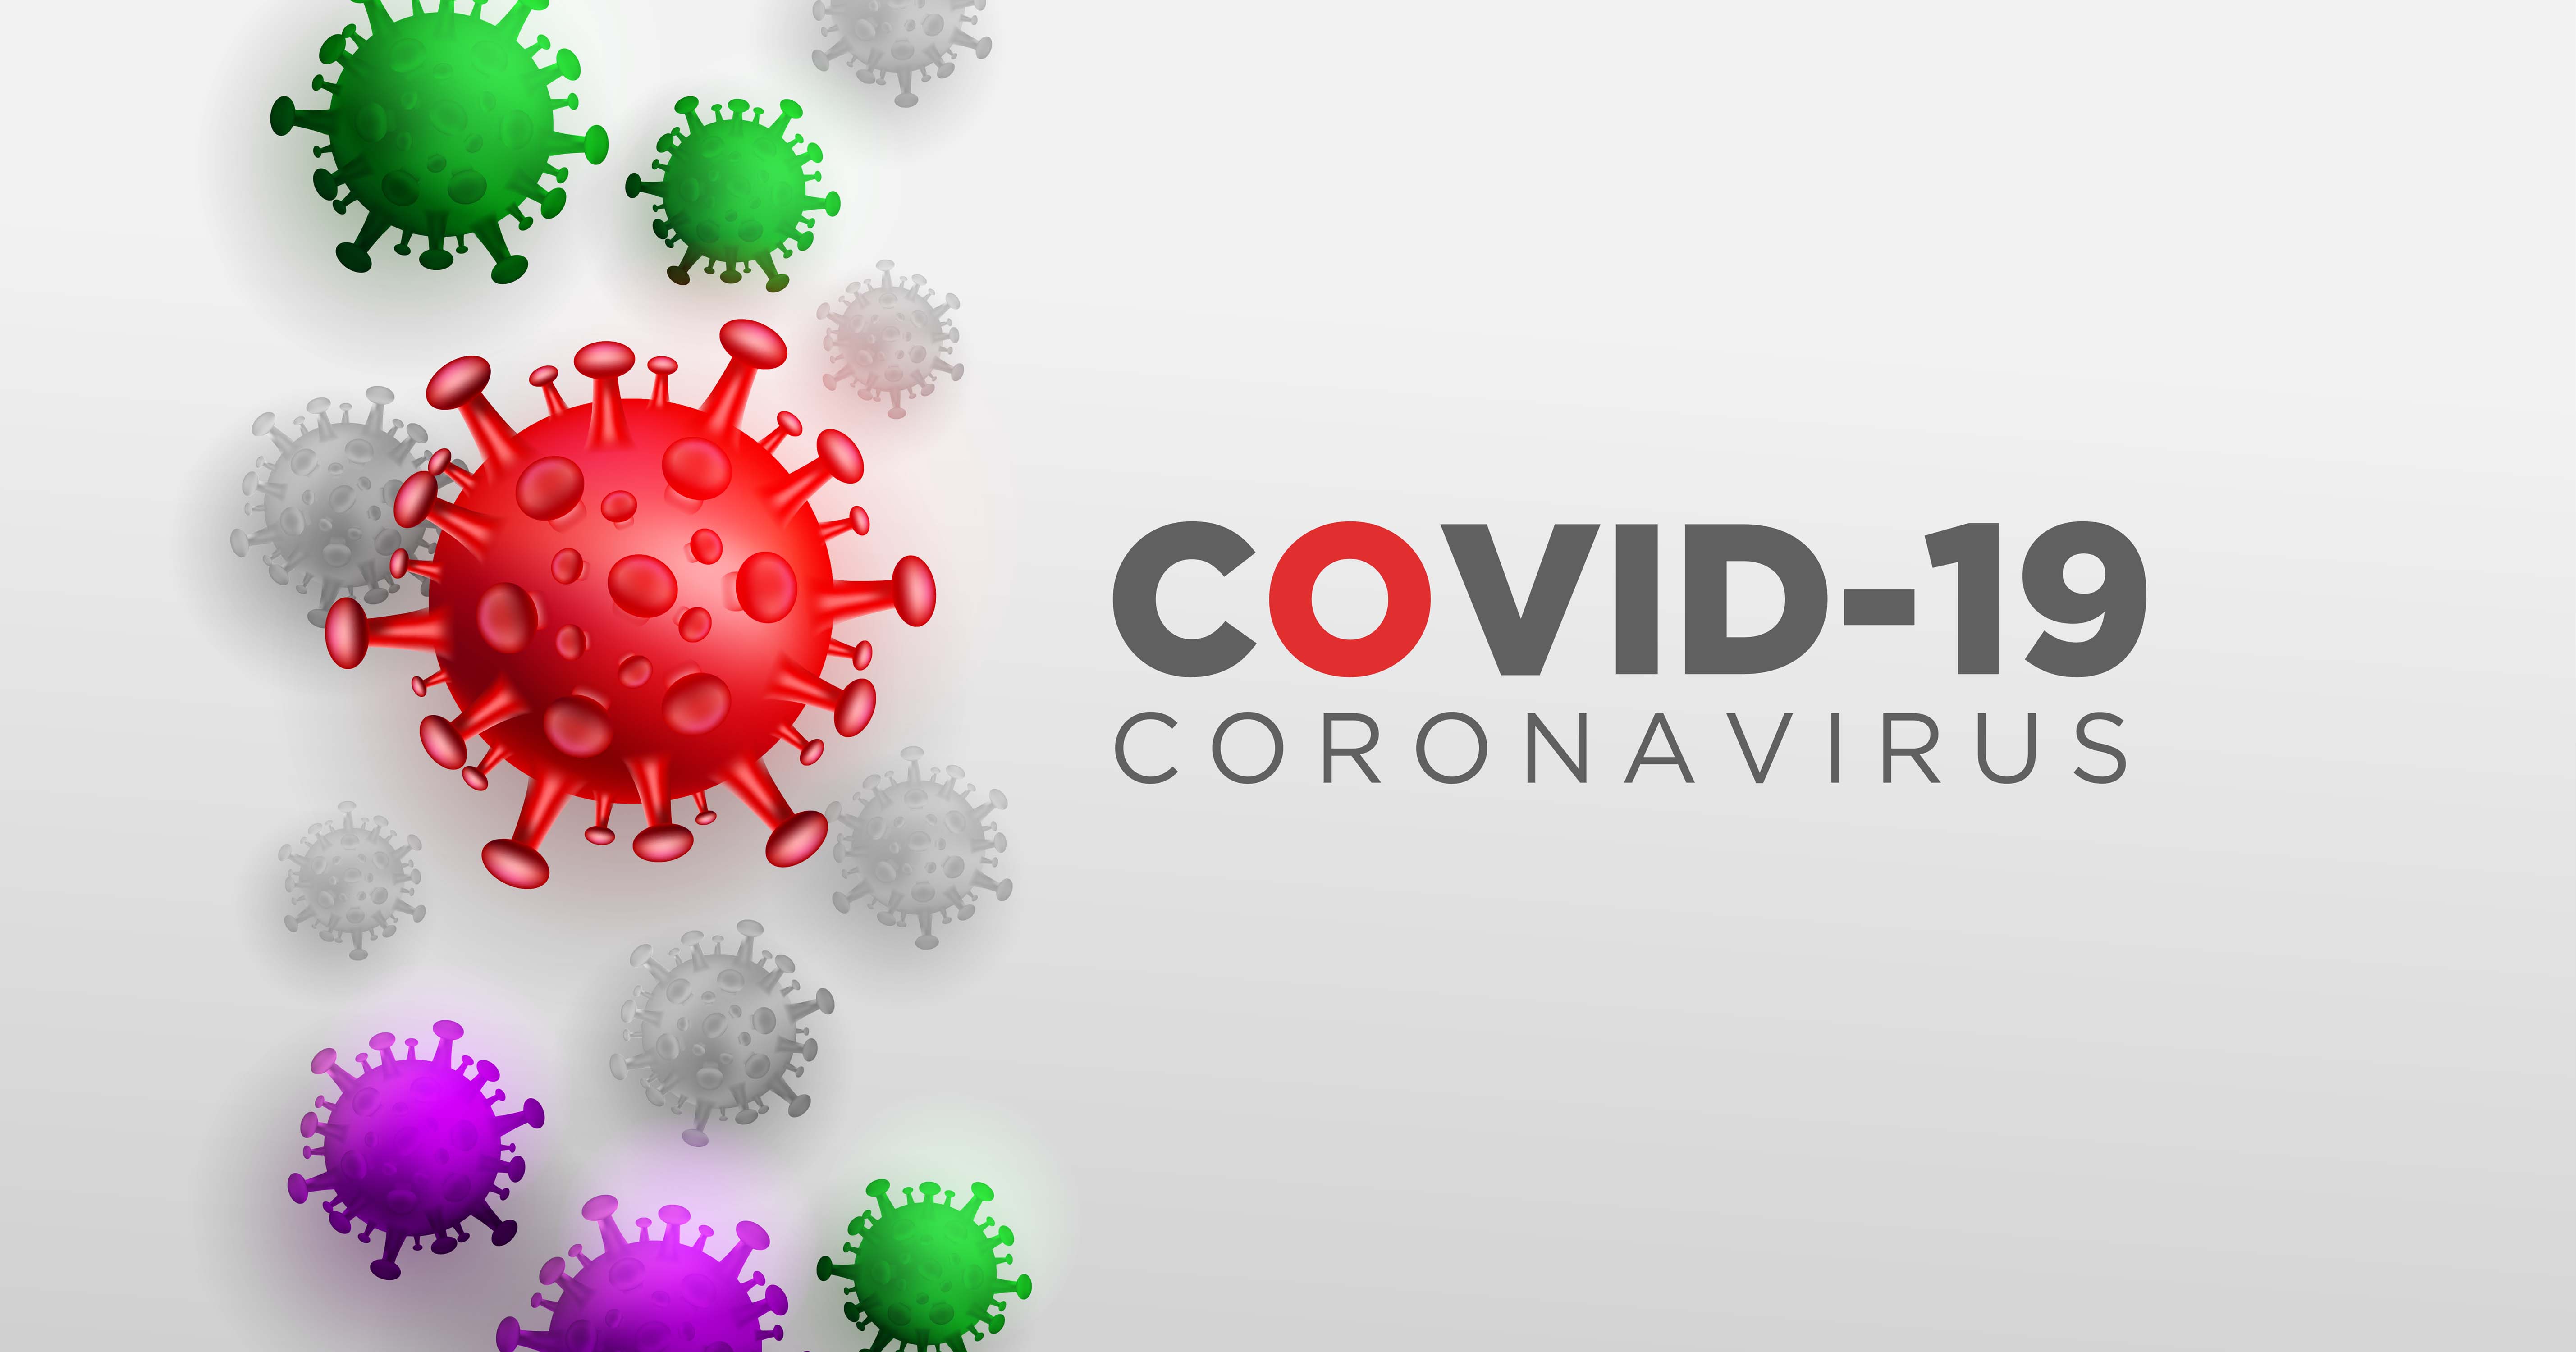 A graphic depicting the corona-virus